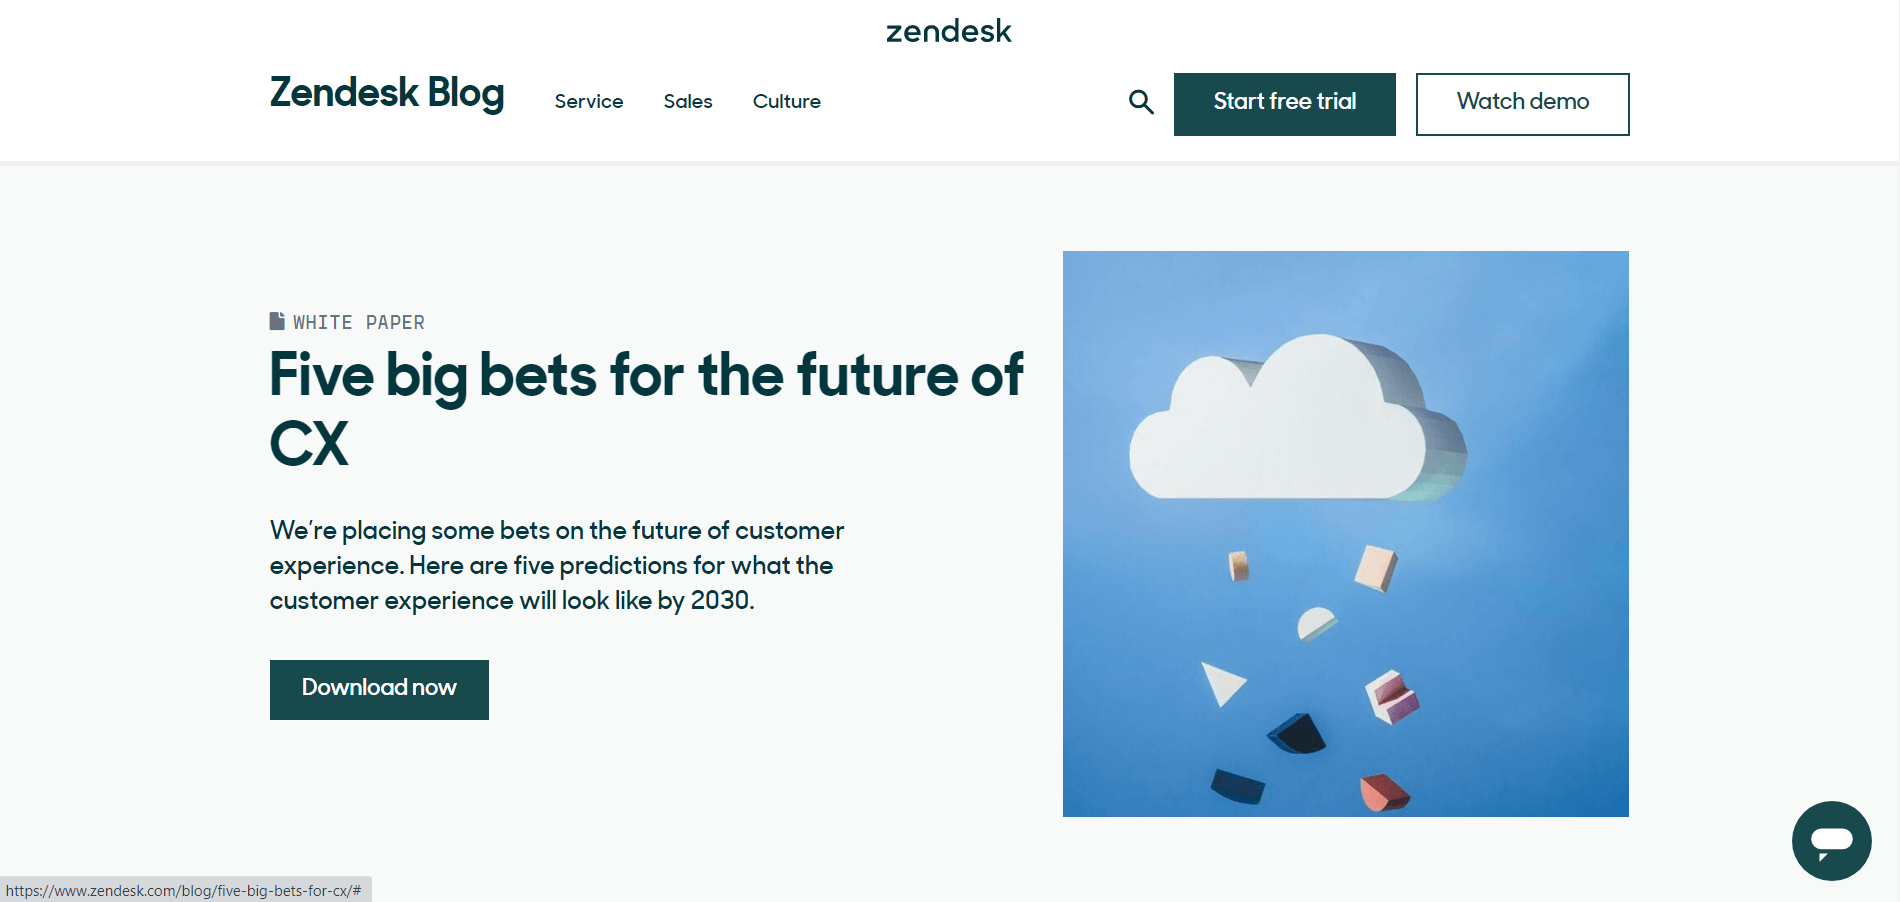 Snapshot of a white paper offered by Zendesk